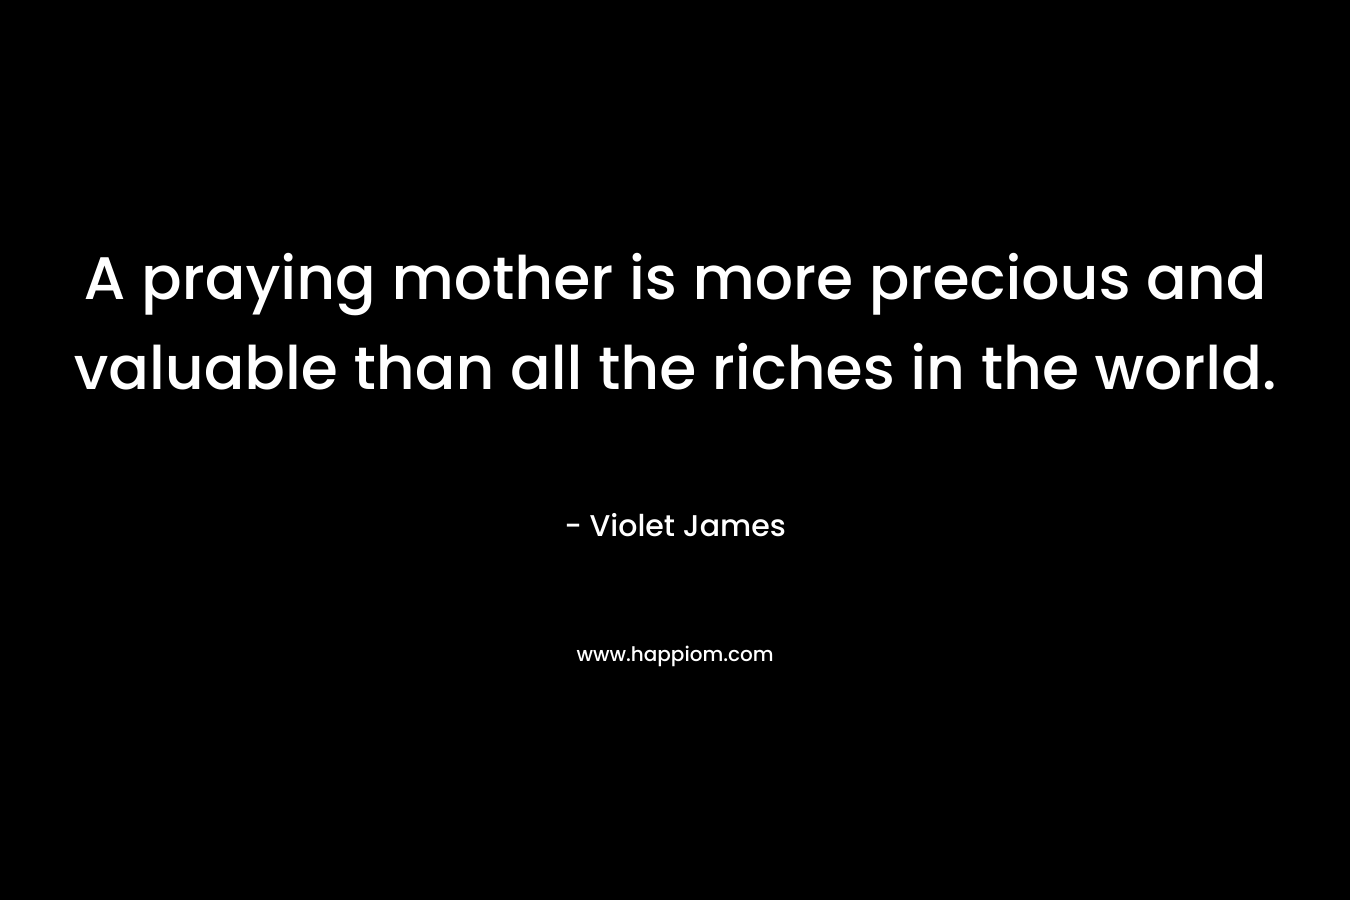 A praying mother is more precious and valuable than all the riches in the world. – Violet James